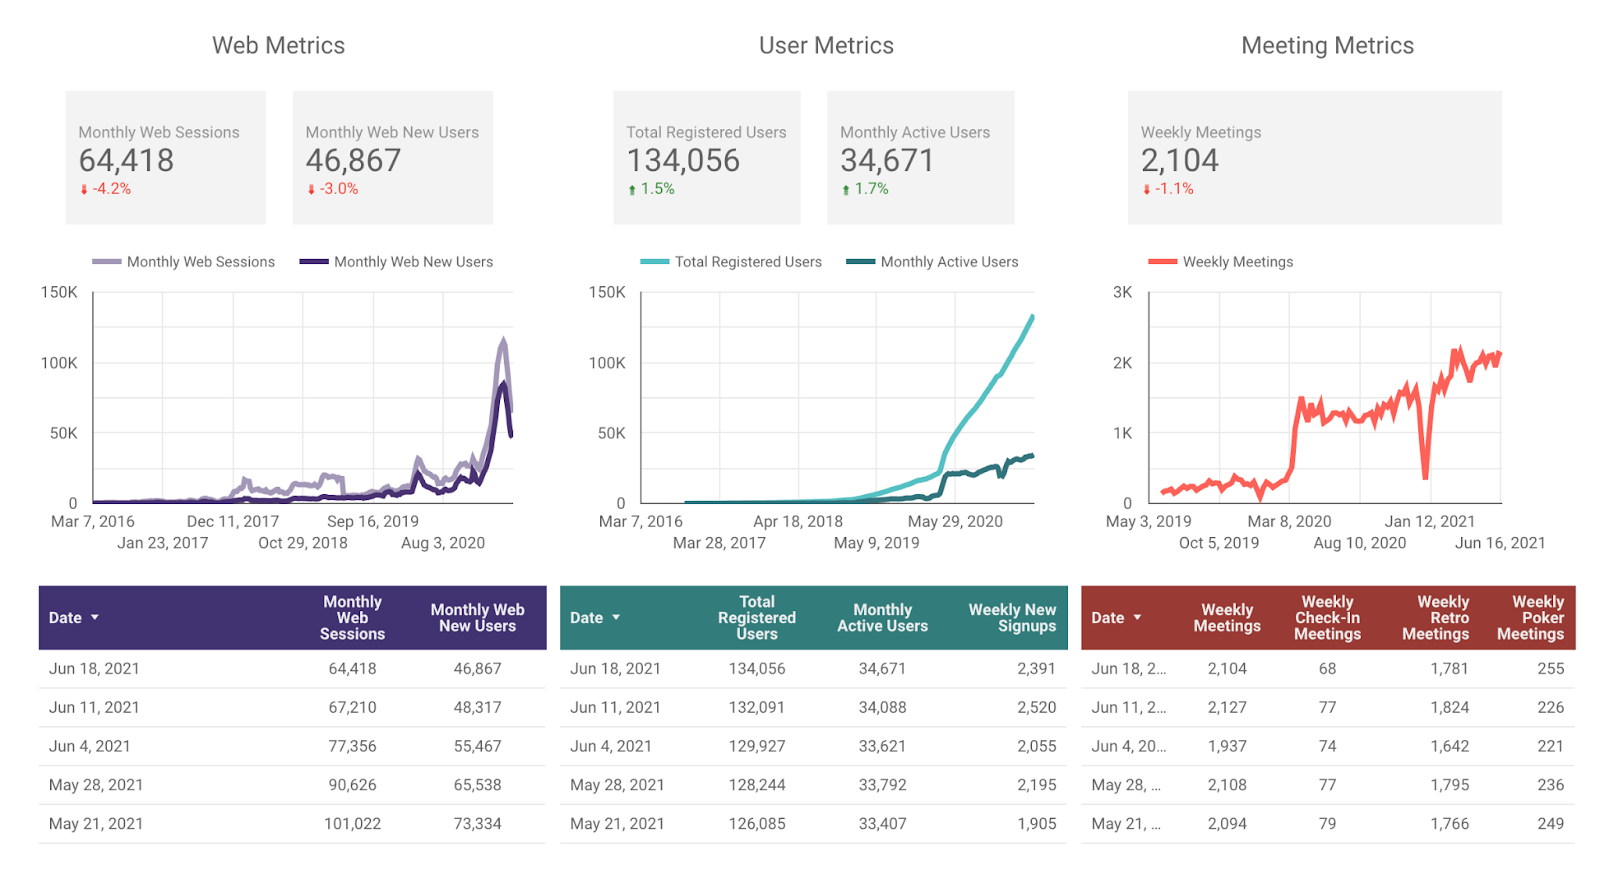 Web, user, and meeting metrics from this week